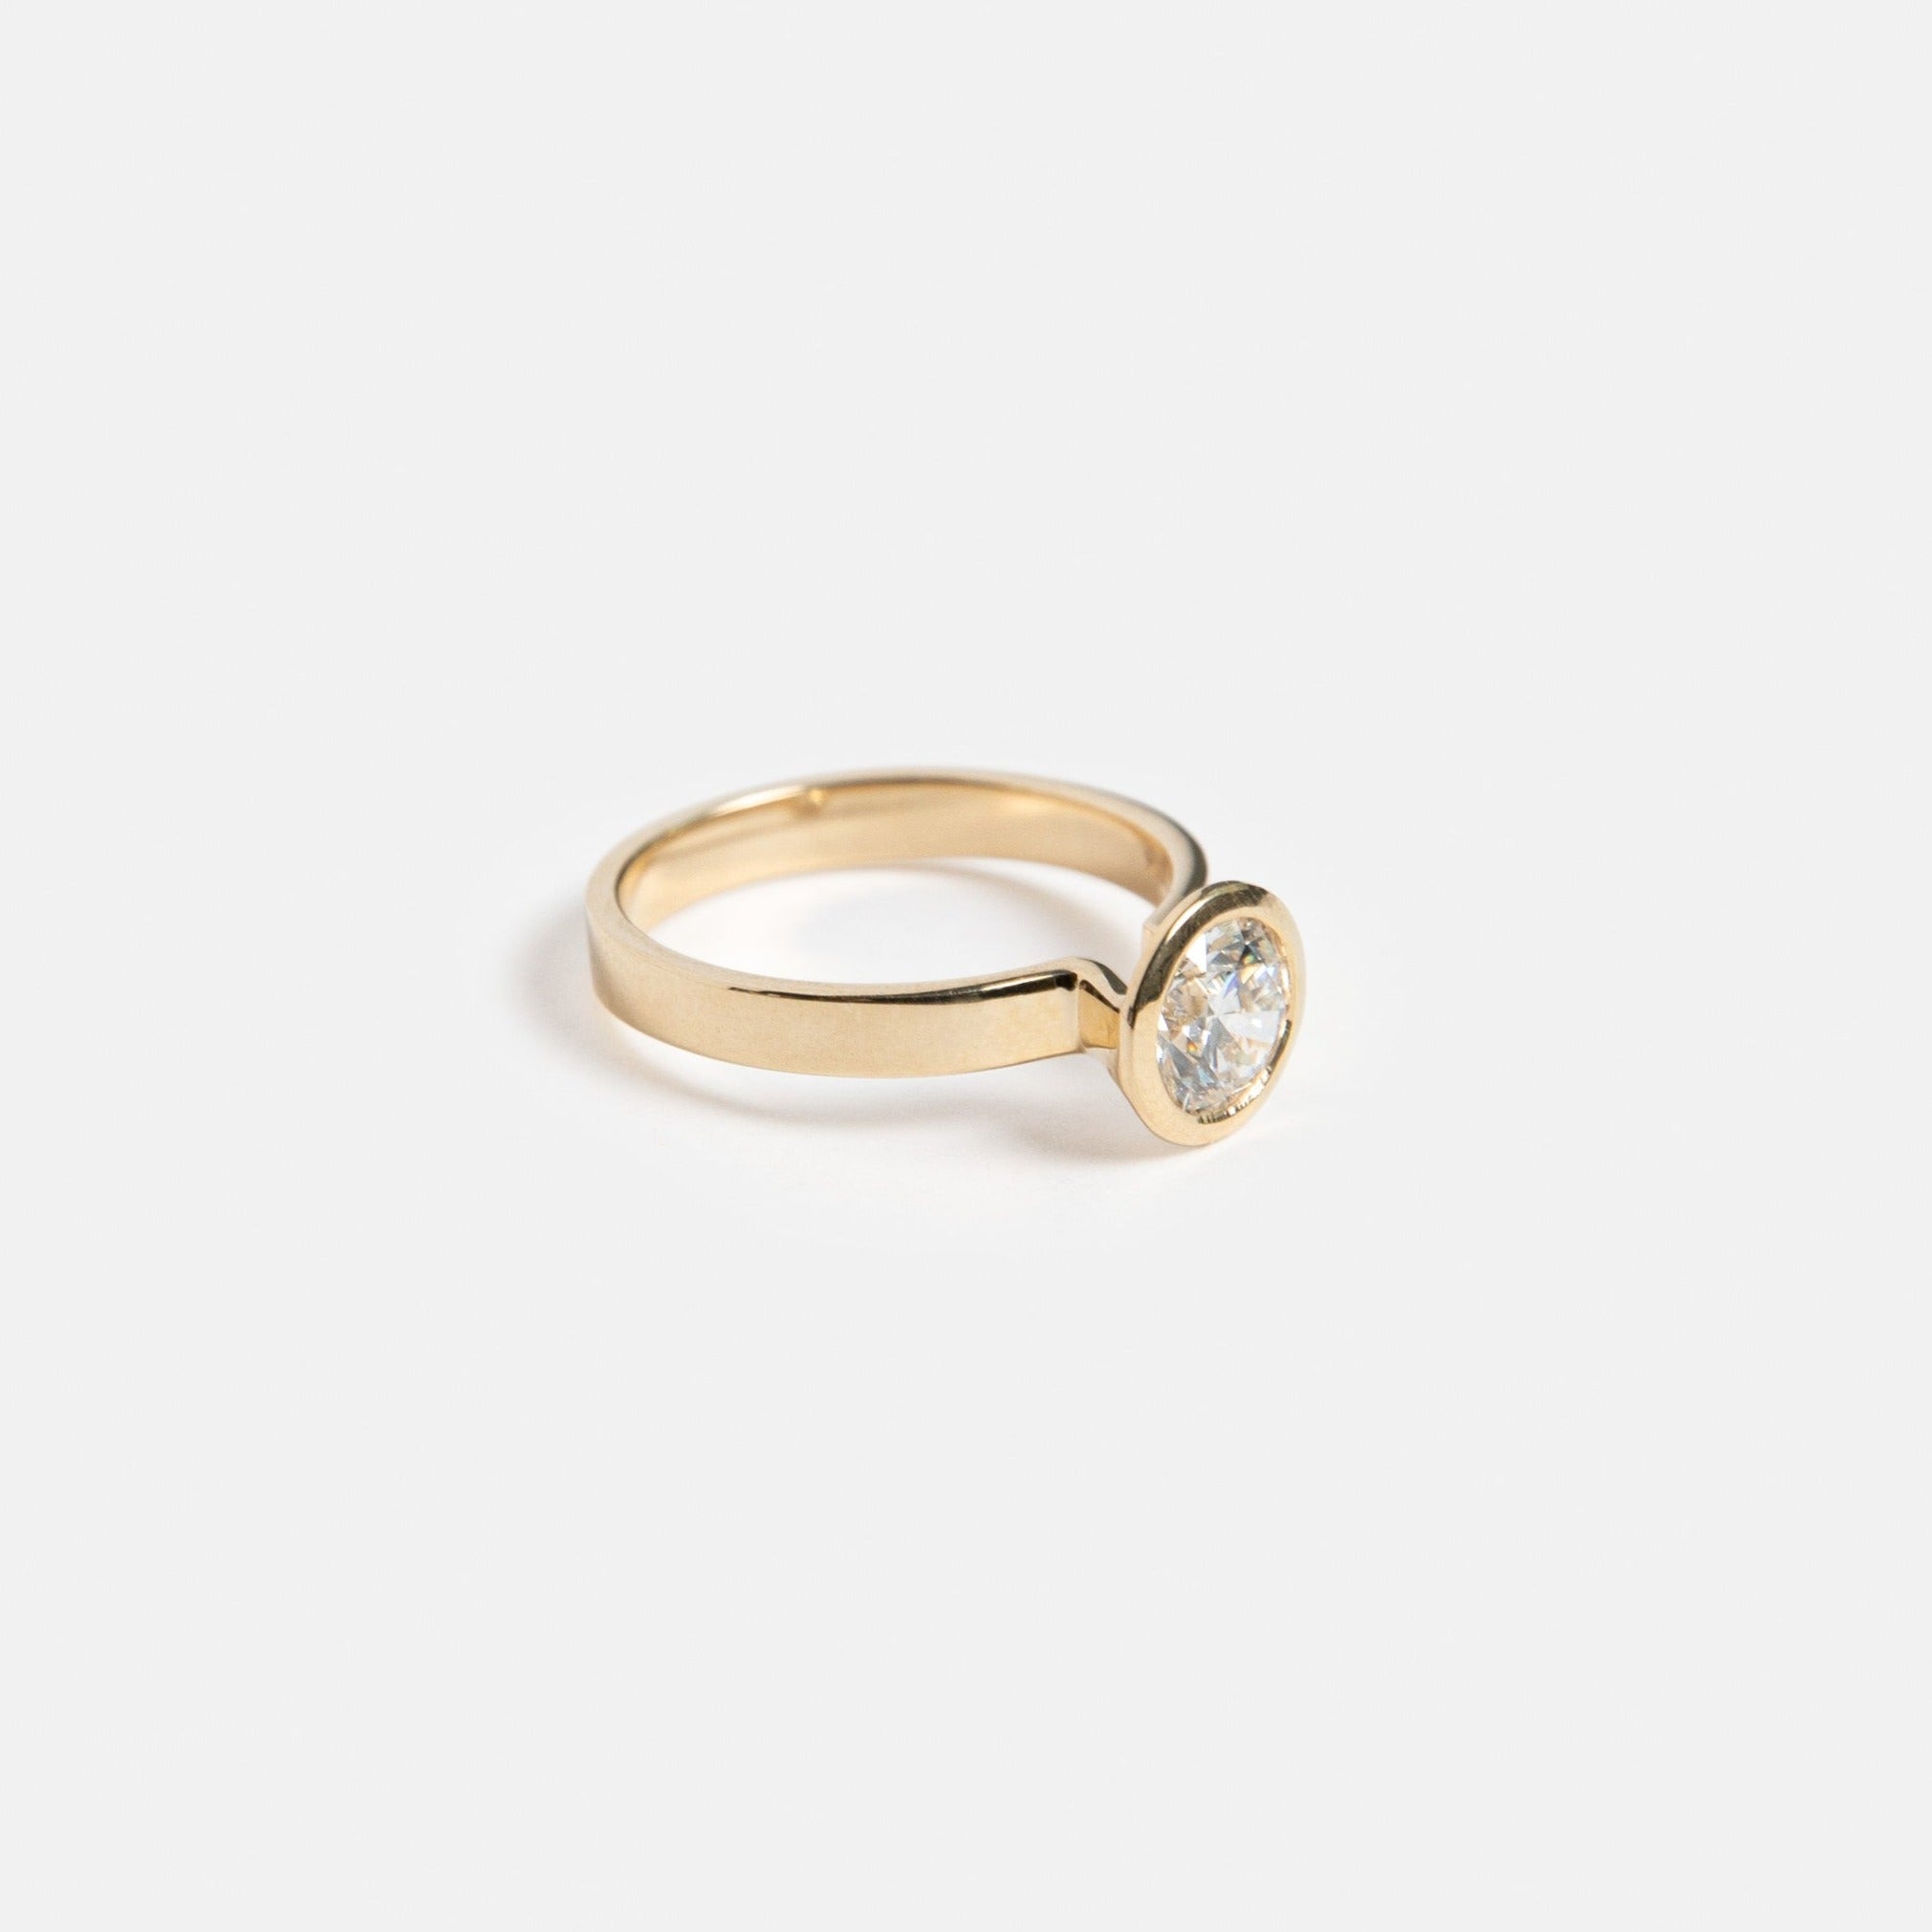 Agne Stackable Ring in 14k Gold set with a 1.03ct round cut lab-grown diamond By SHW Fine Jewelry NYC